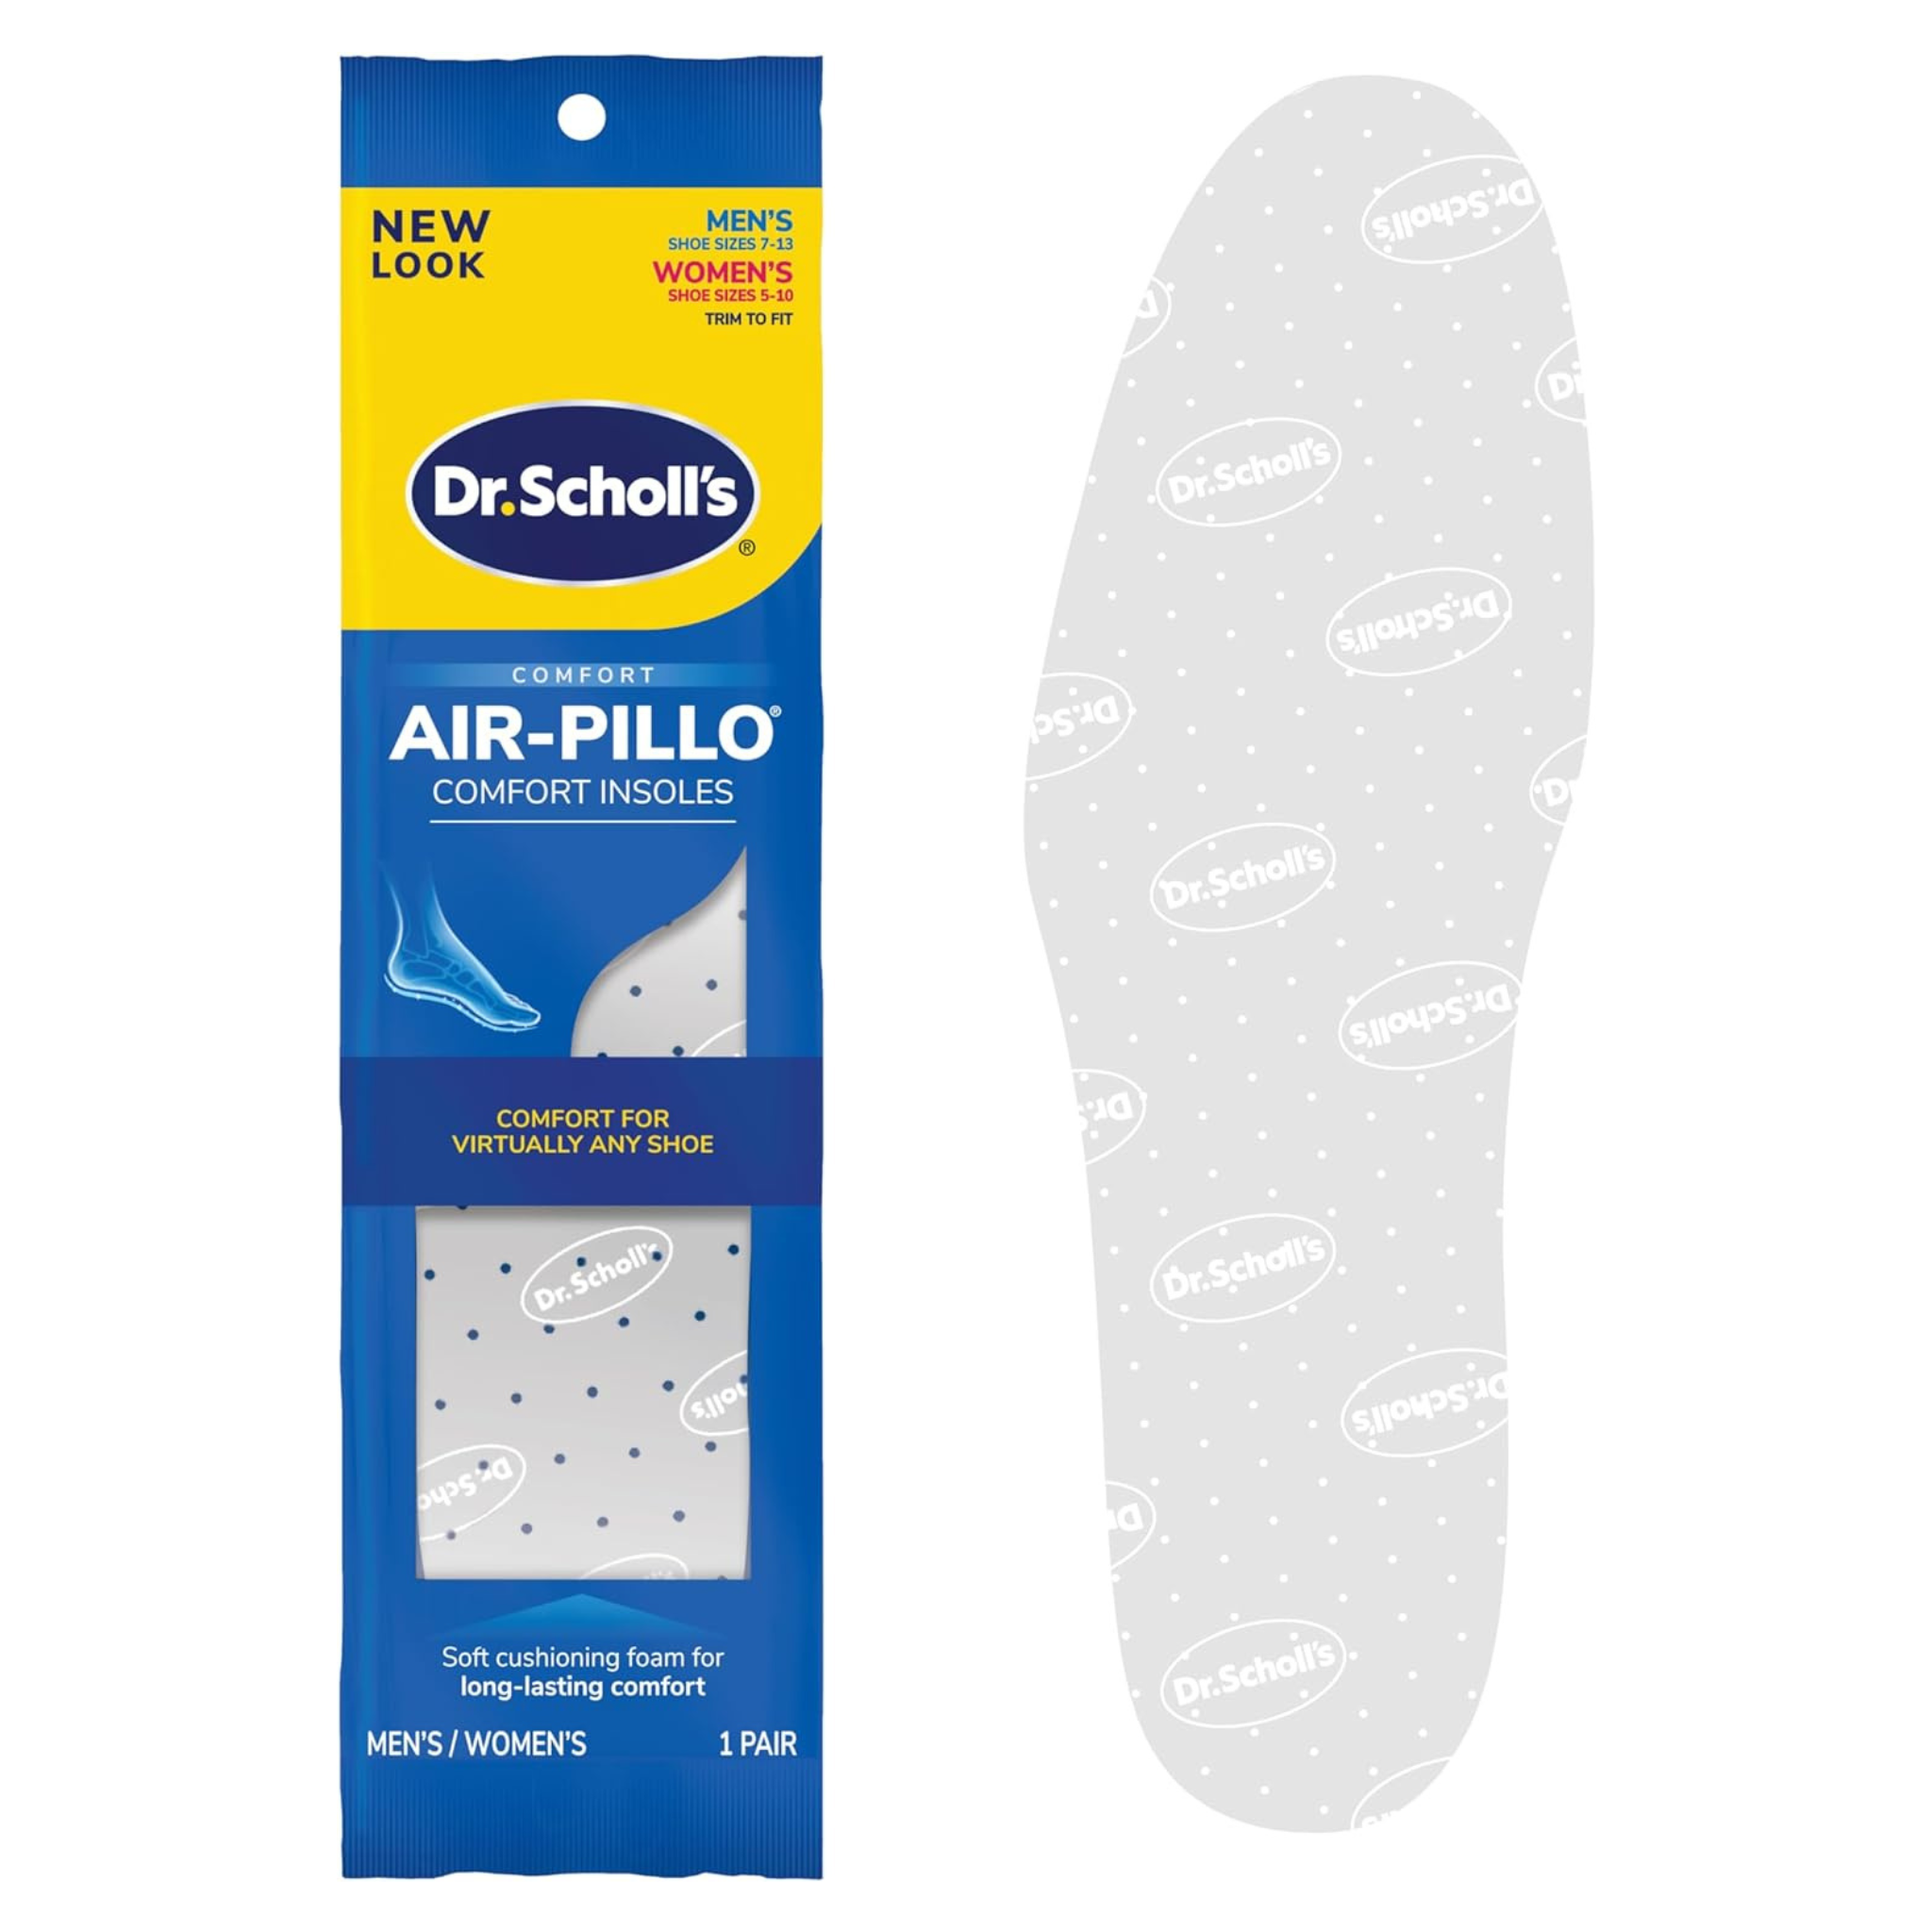 Dr. Scholl's Air-Pillo Ultra-Soft Cushioning Insoles